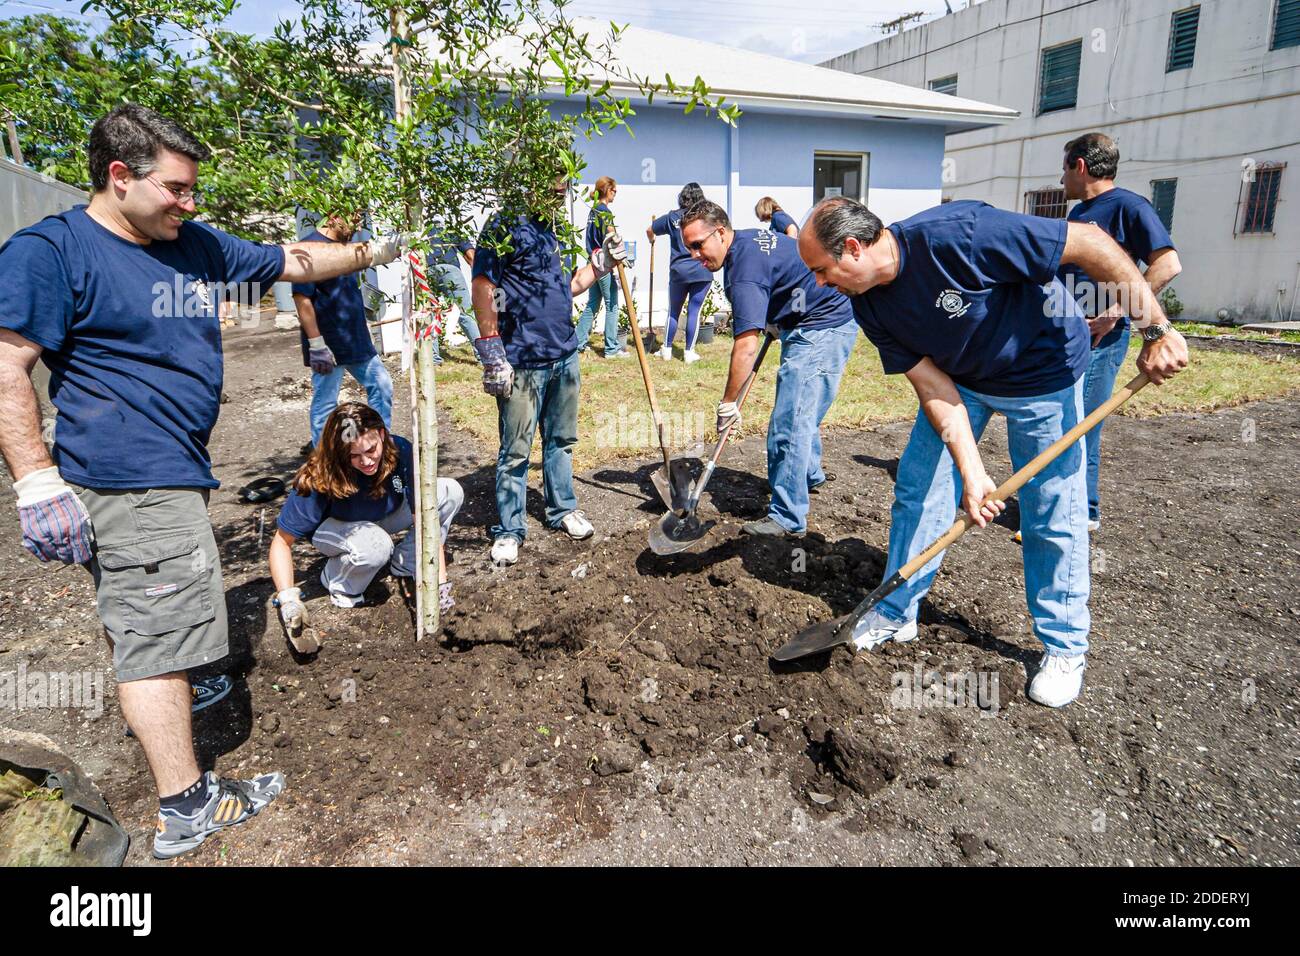 Miami Florida,Overtown Habitat For Humanity,volunteers building new house low income inner city neighborhood,landscaping planting bushes trees Hispani Stock Photo